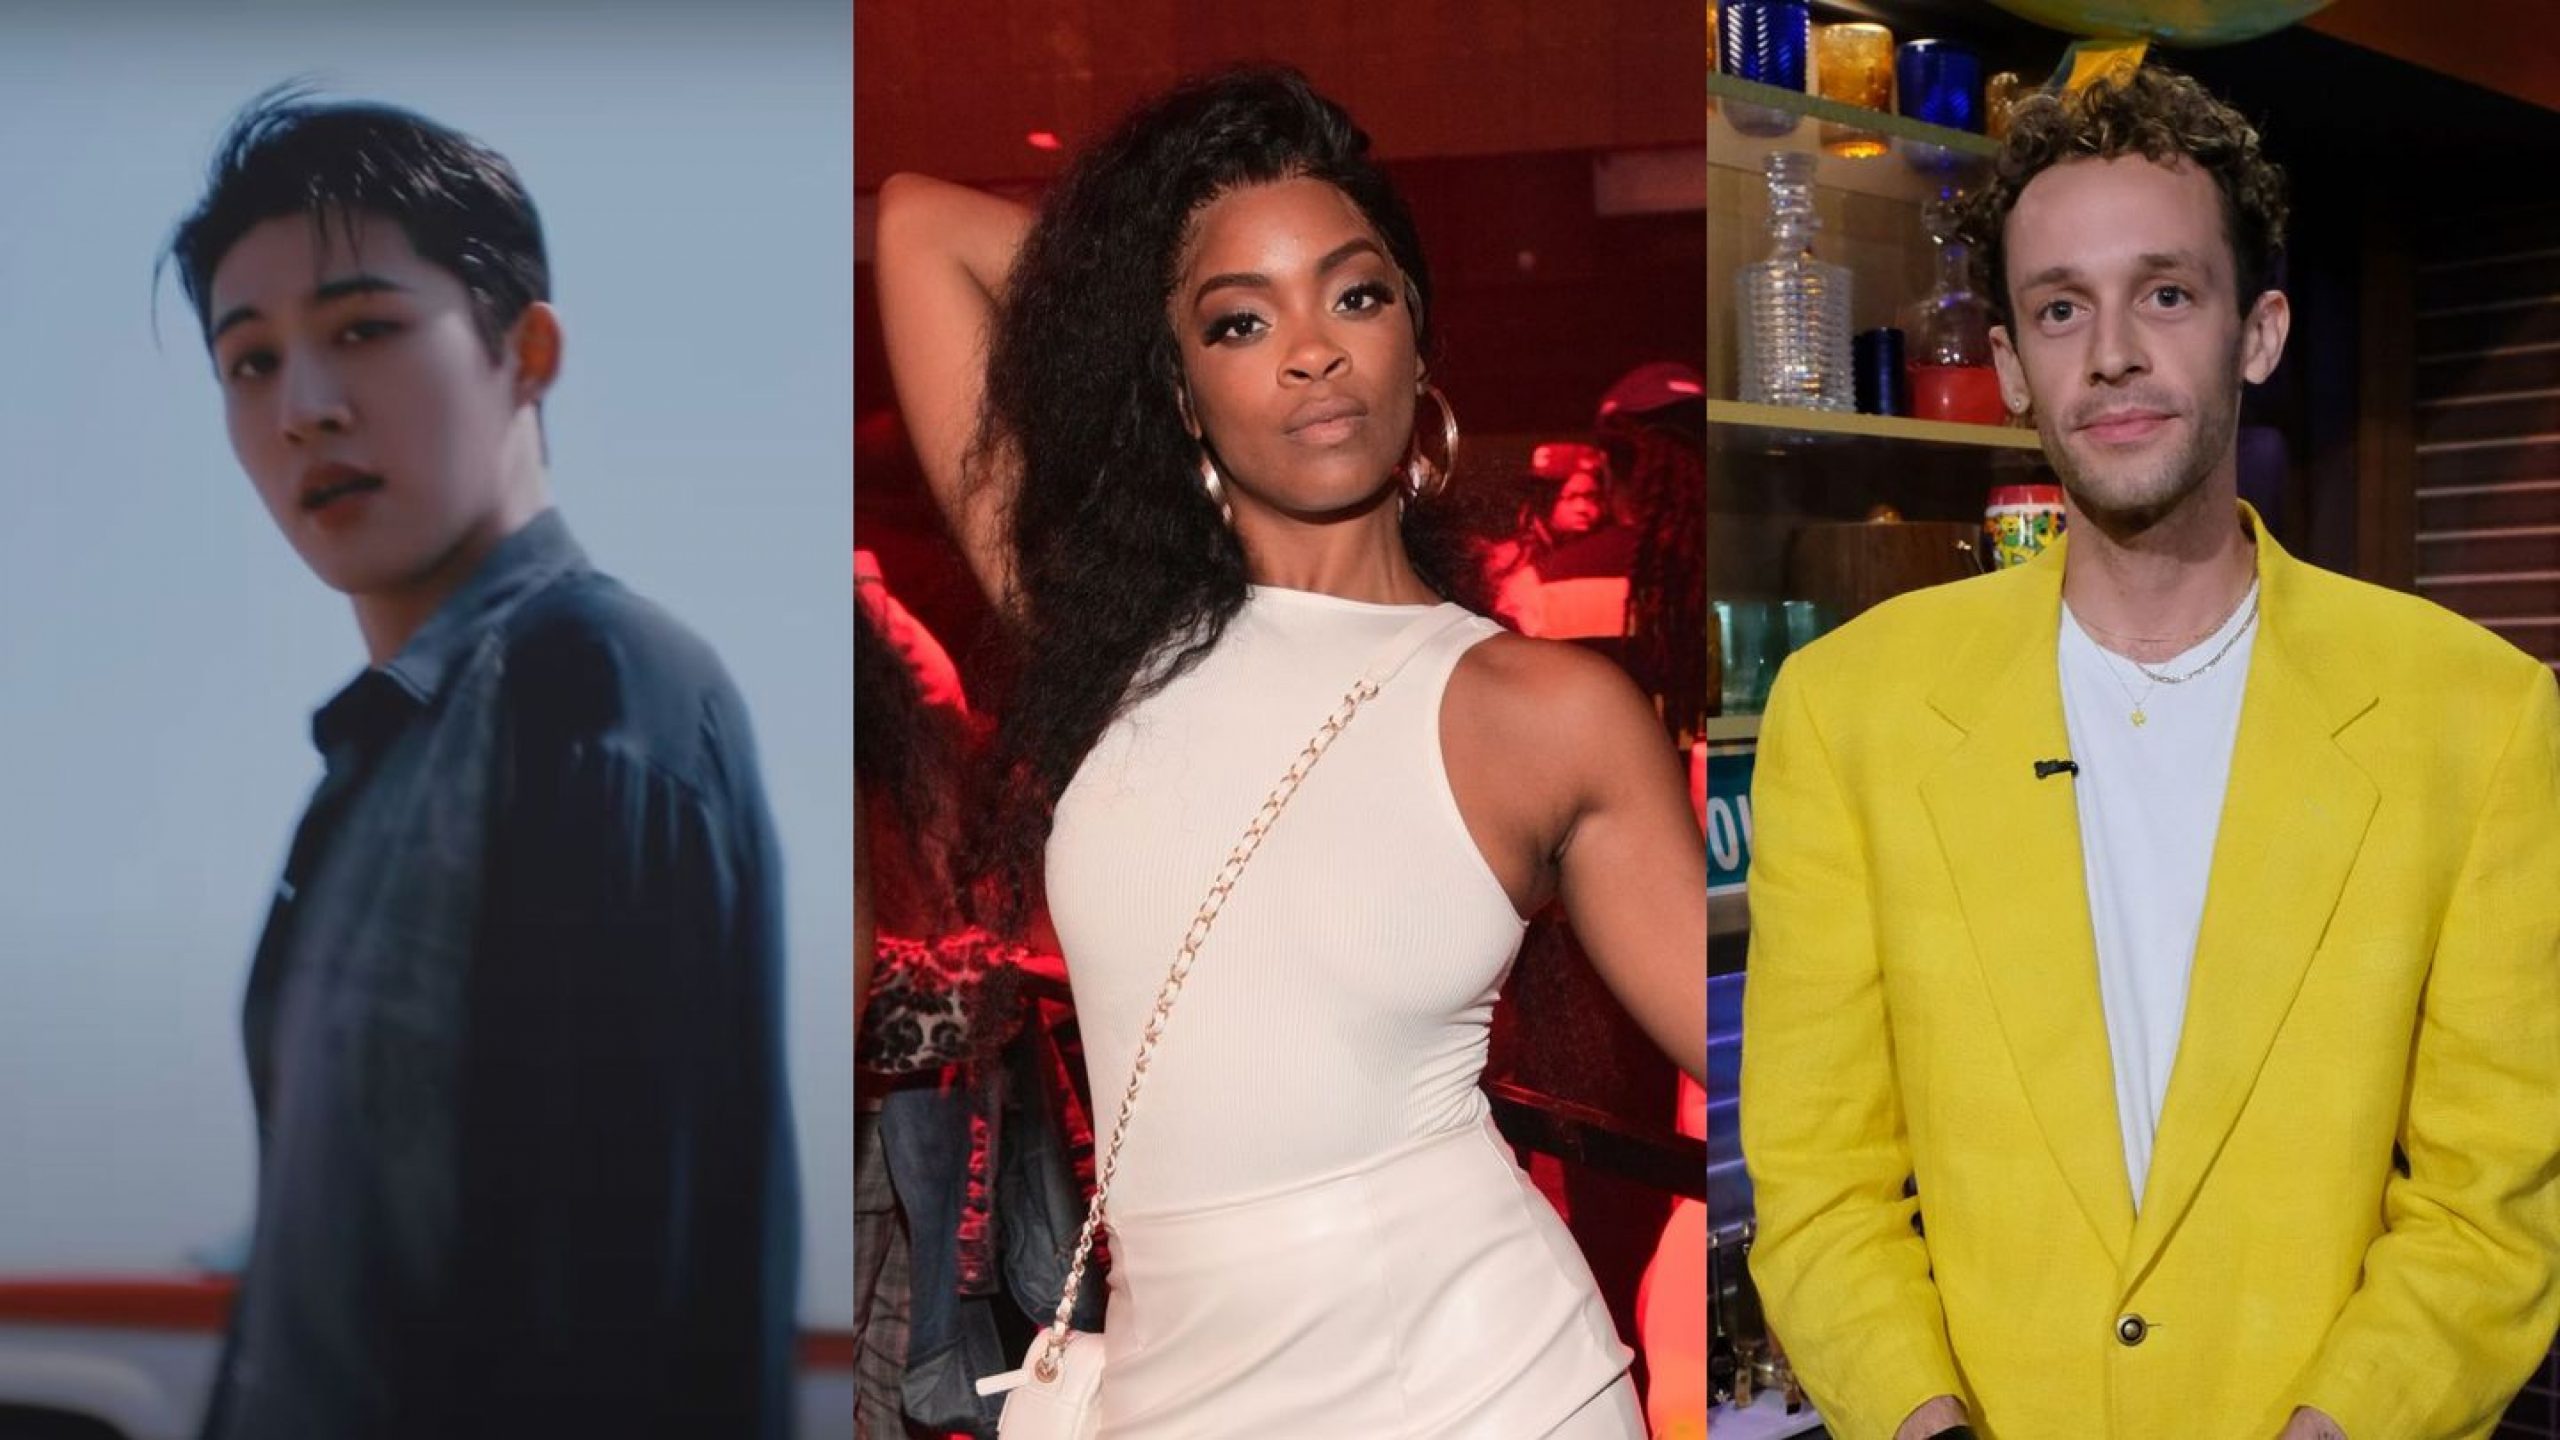 Bop Shop: Songs From B.I, Wrabel, Queen Naija And Ari Lennox, And More